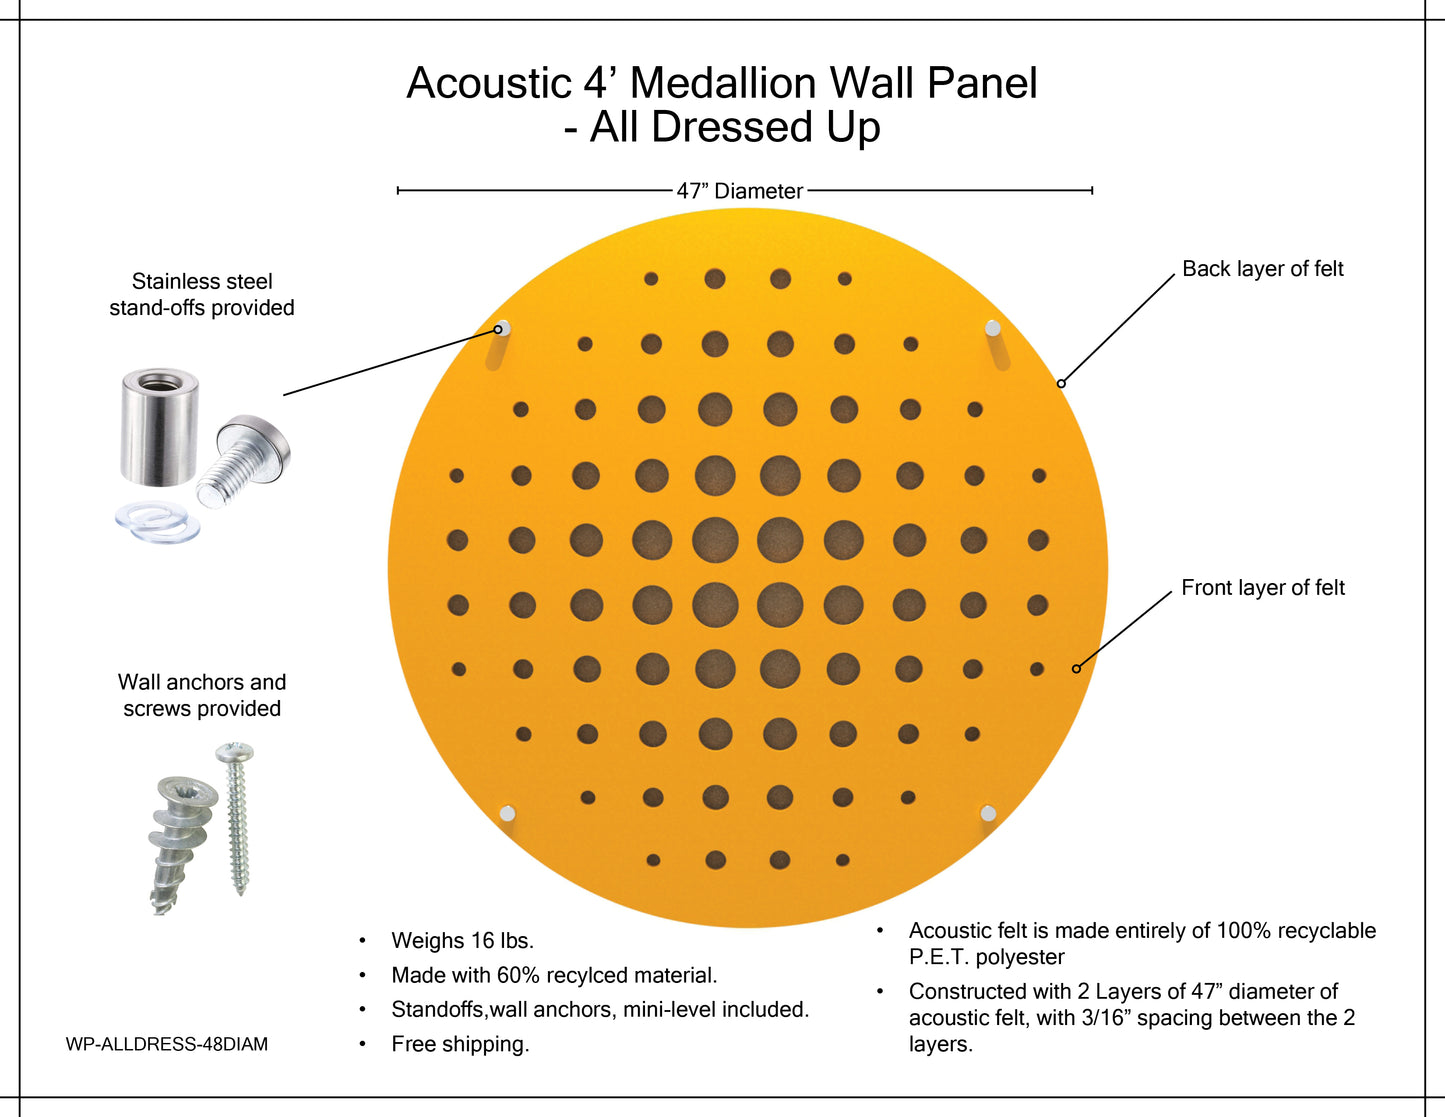 Medallion Acoustic Wall Panel - All Dressed Up